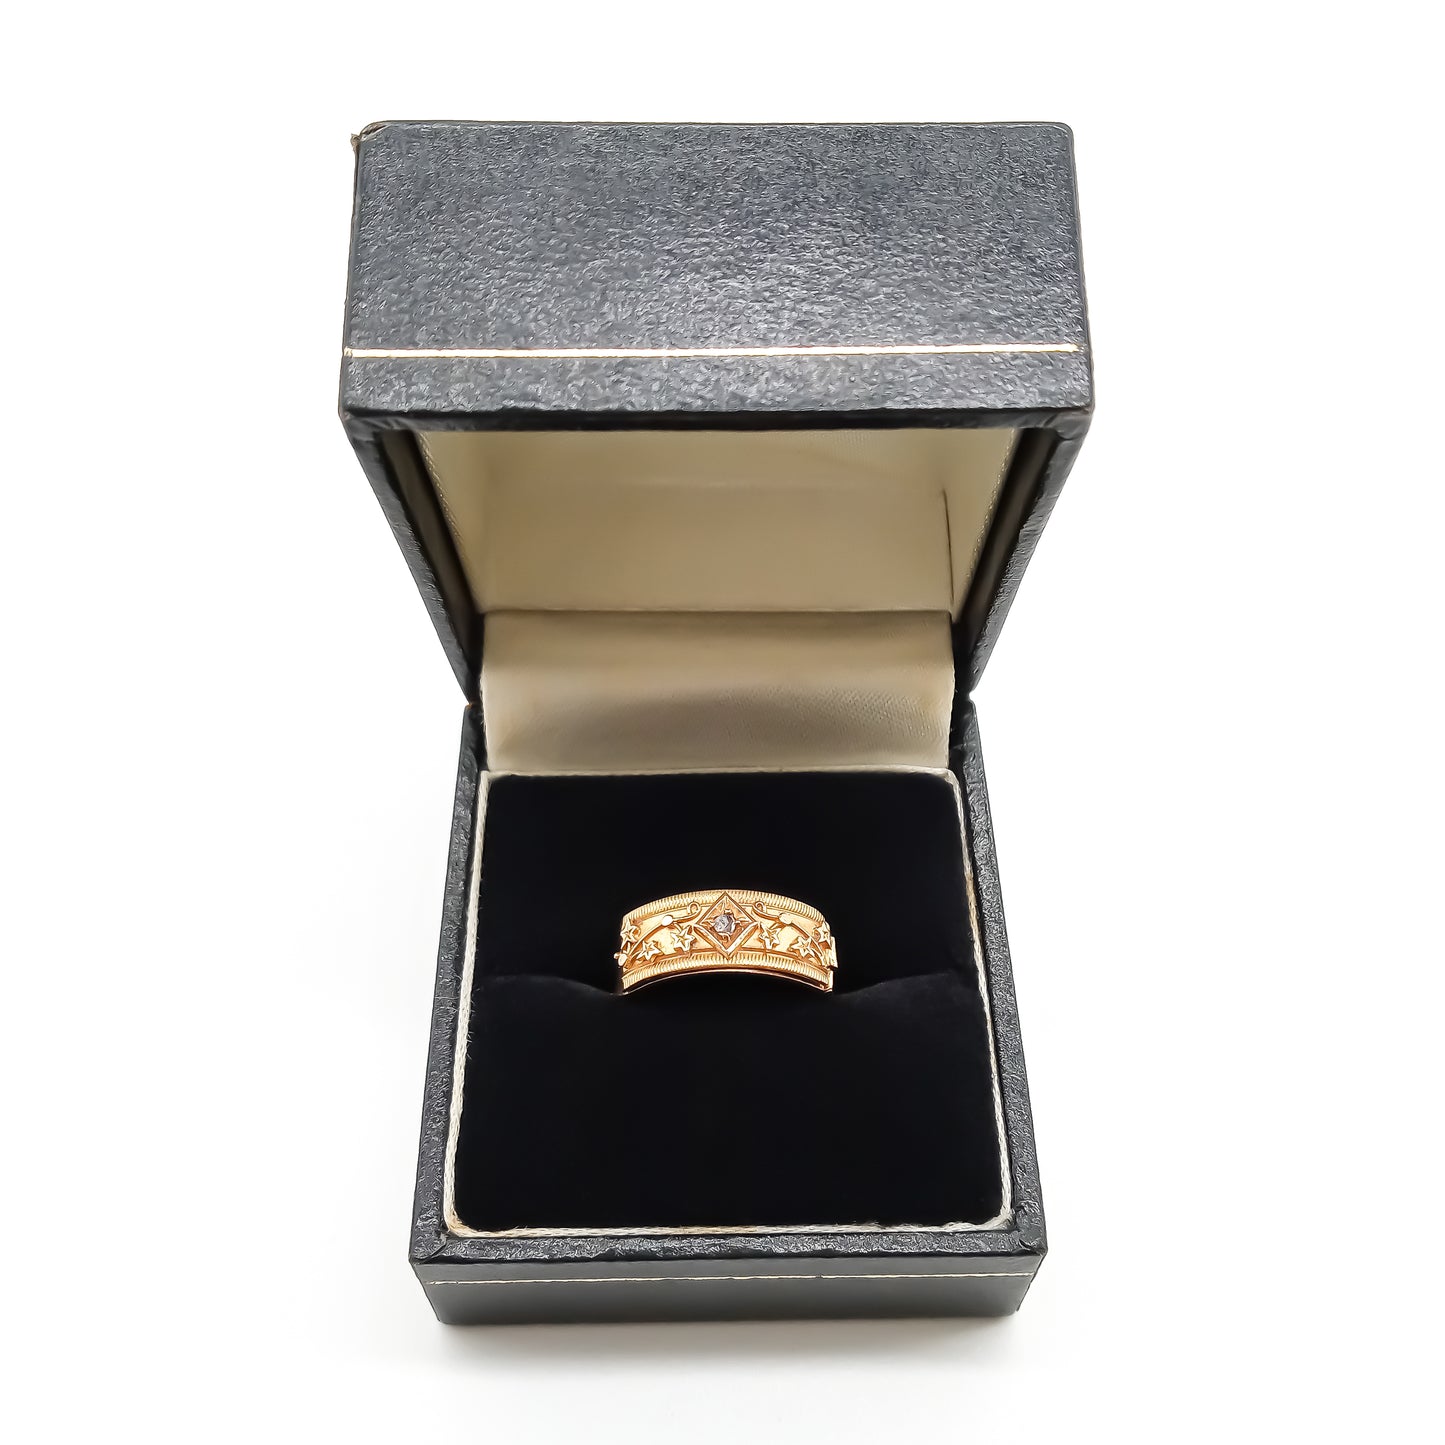 Rare 18ct gold Victorian REGARD ring set with a small mine-cut diamond and delicate leaf design in a black ring box.